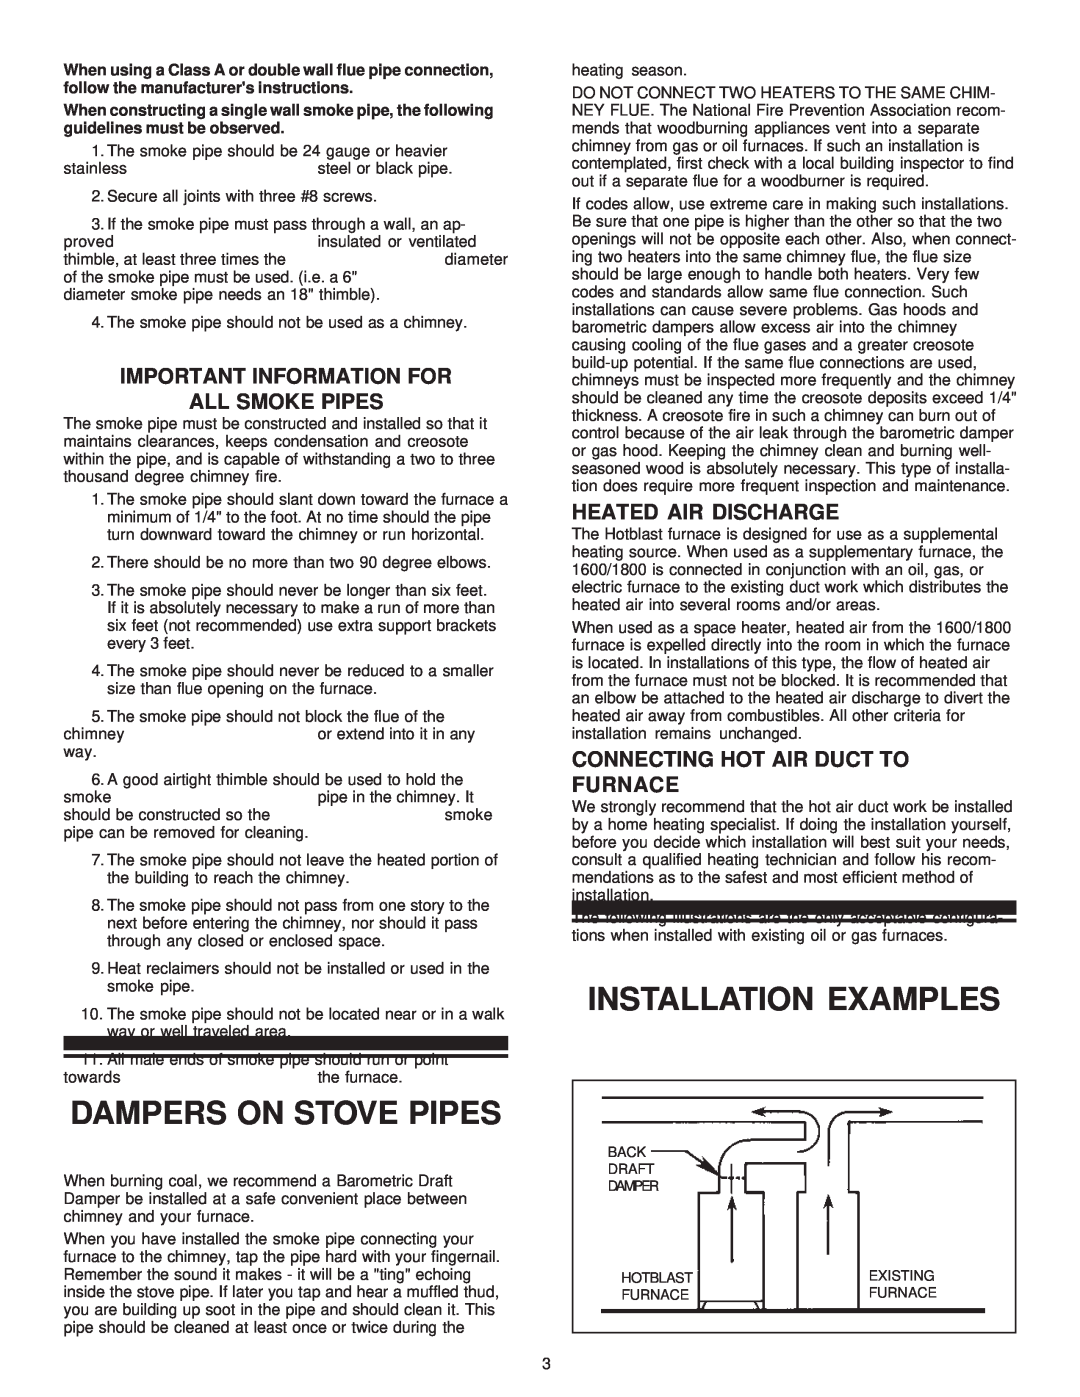 United States Stove 1600, 1800 Dampers On Stove Pipes, Installation Examples, Important Information For All Smoke Pipes 